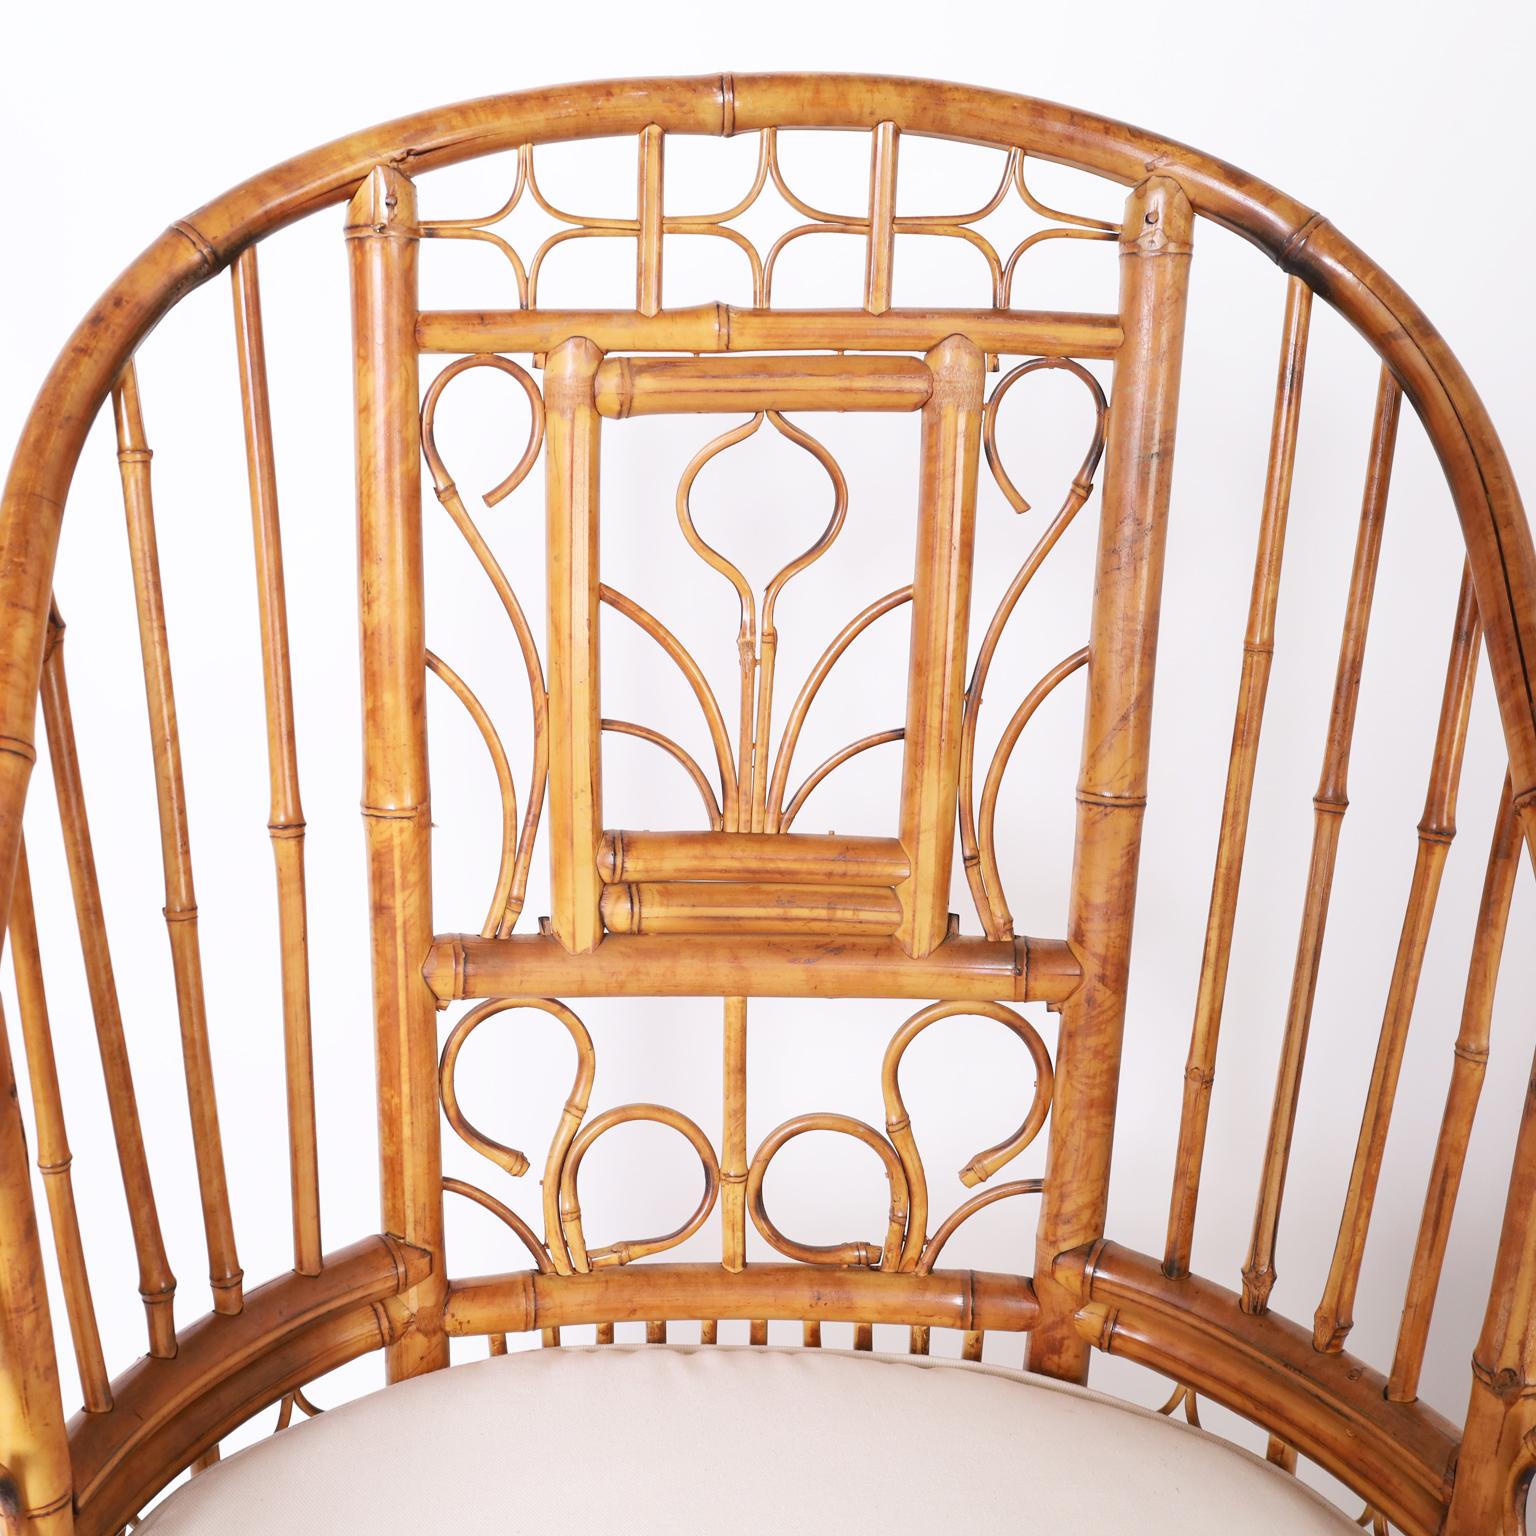 Philippine Near Pair of Vintage Brighton Pavilion Style Bamboo Chairs